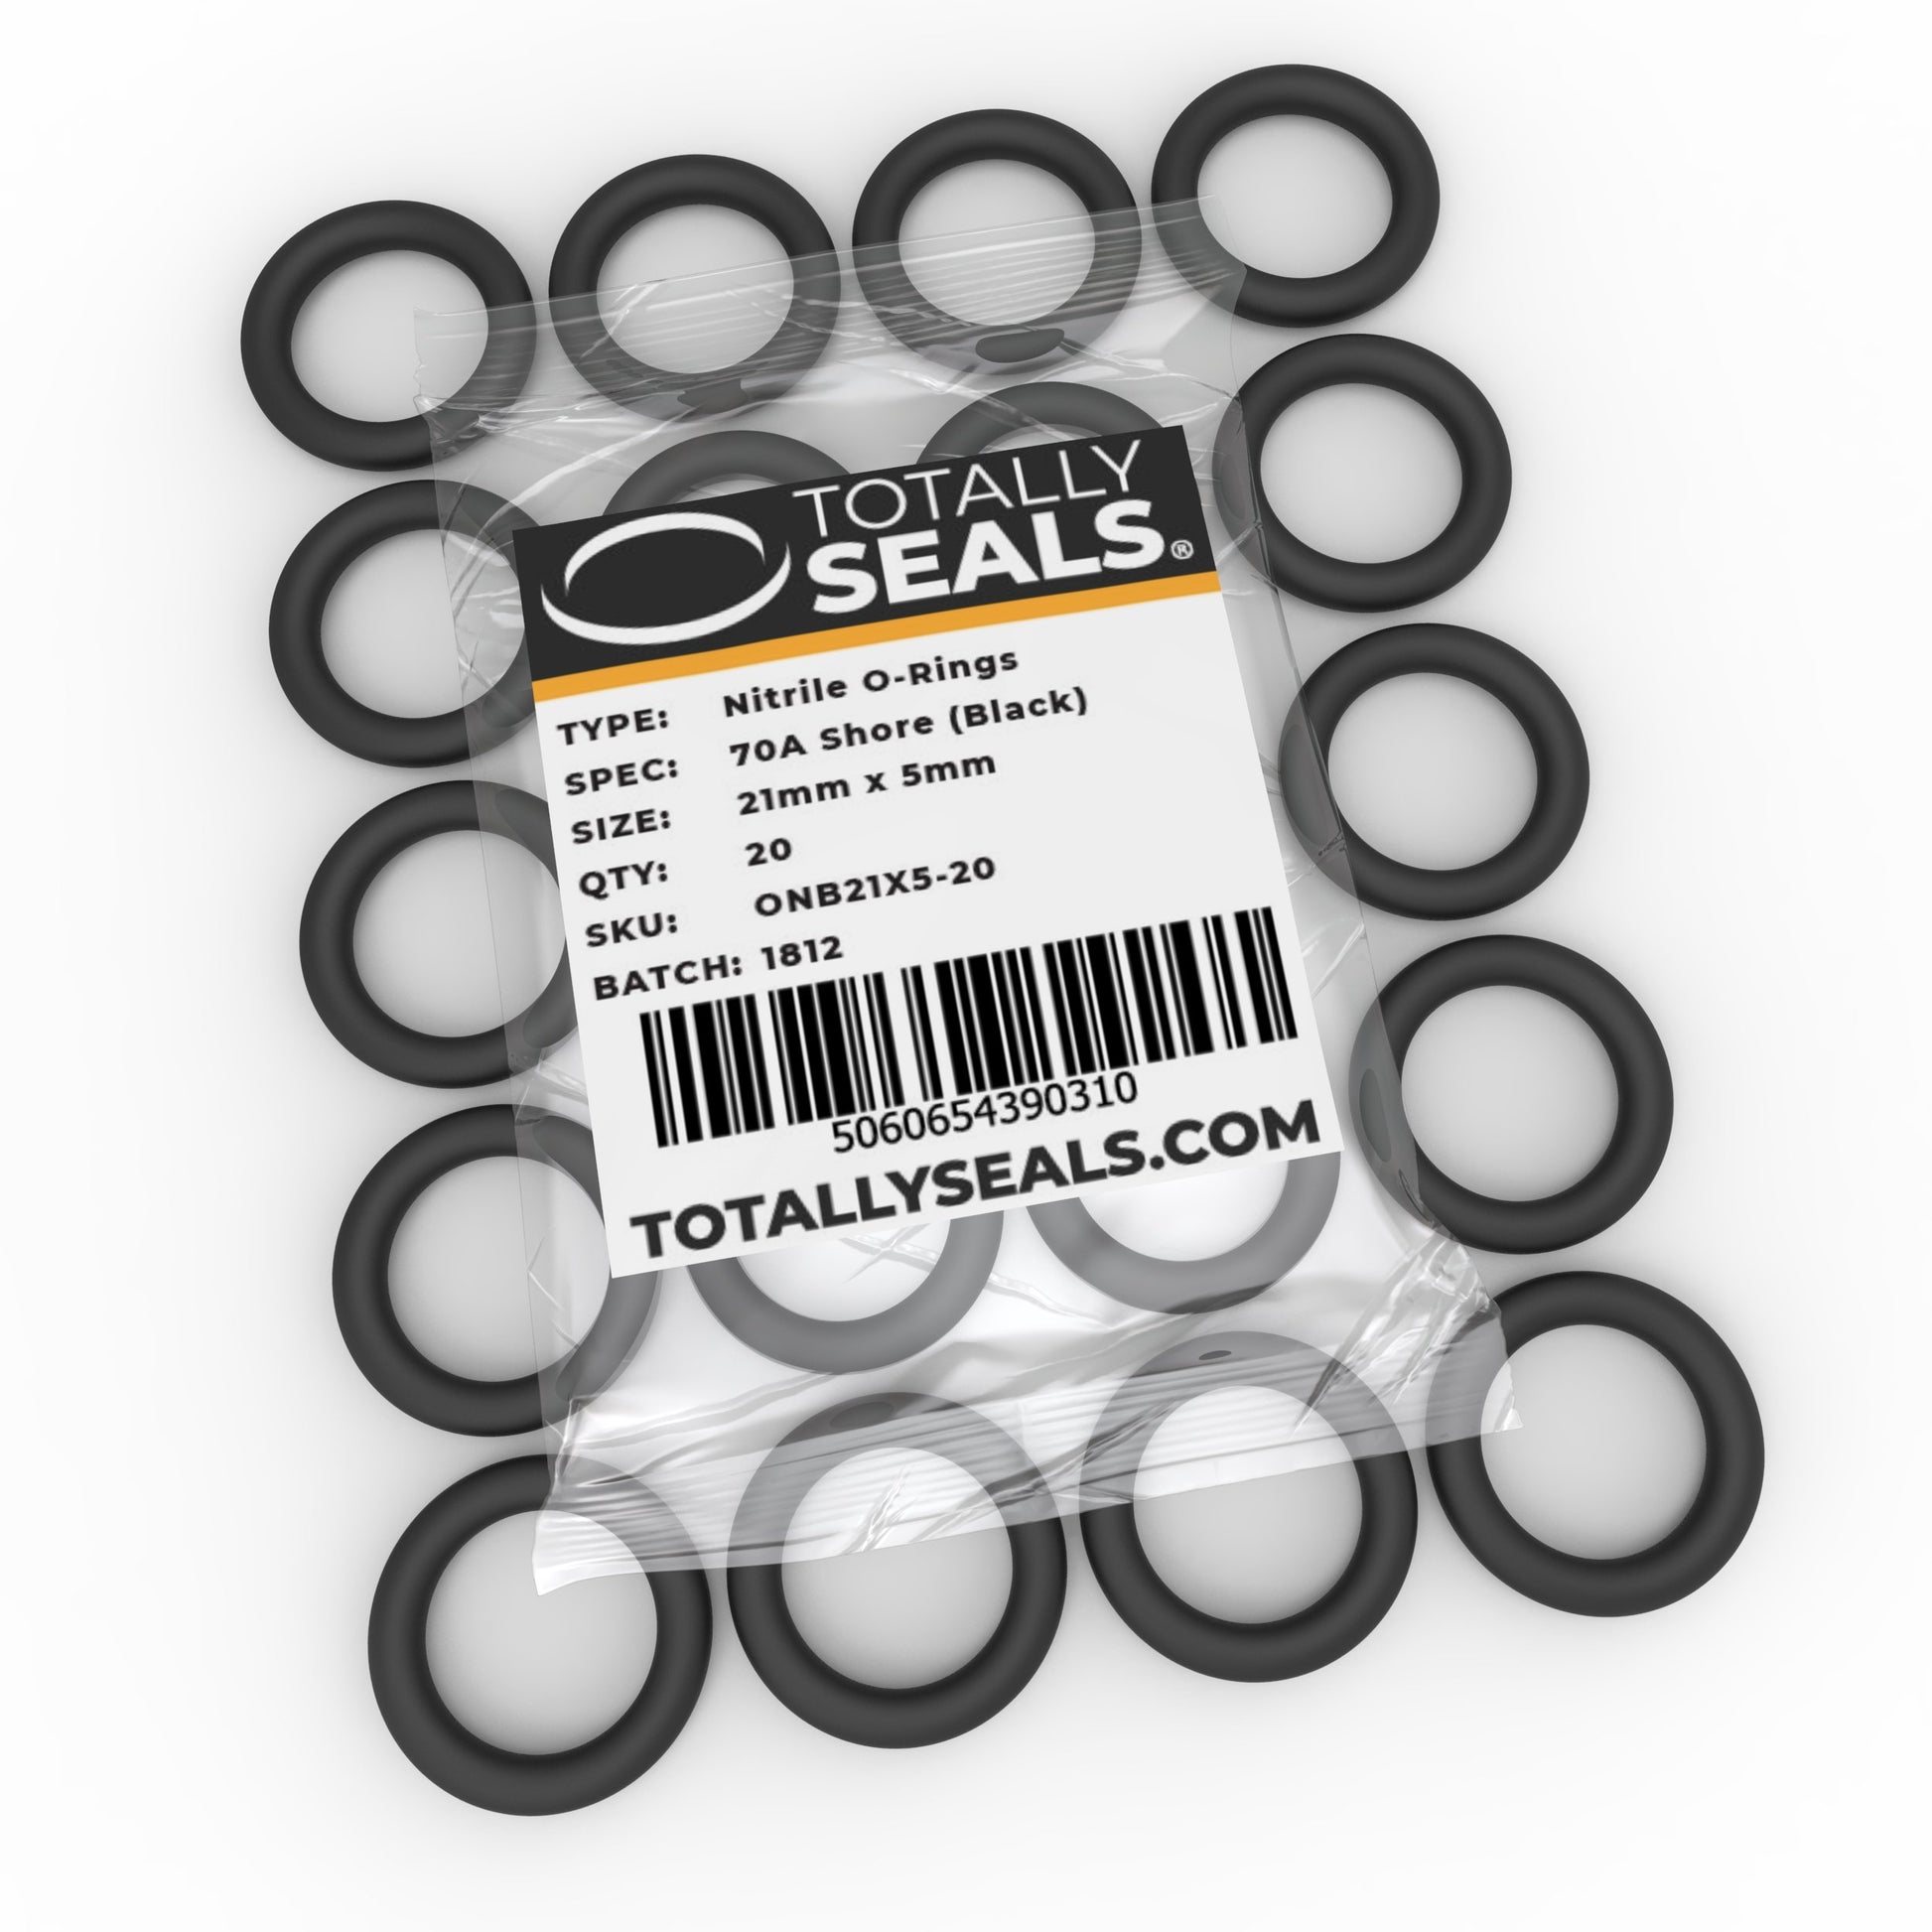 21mm x 5mm (31mm OD) Nitrile O-Rings - Totally Seals®